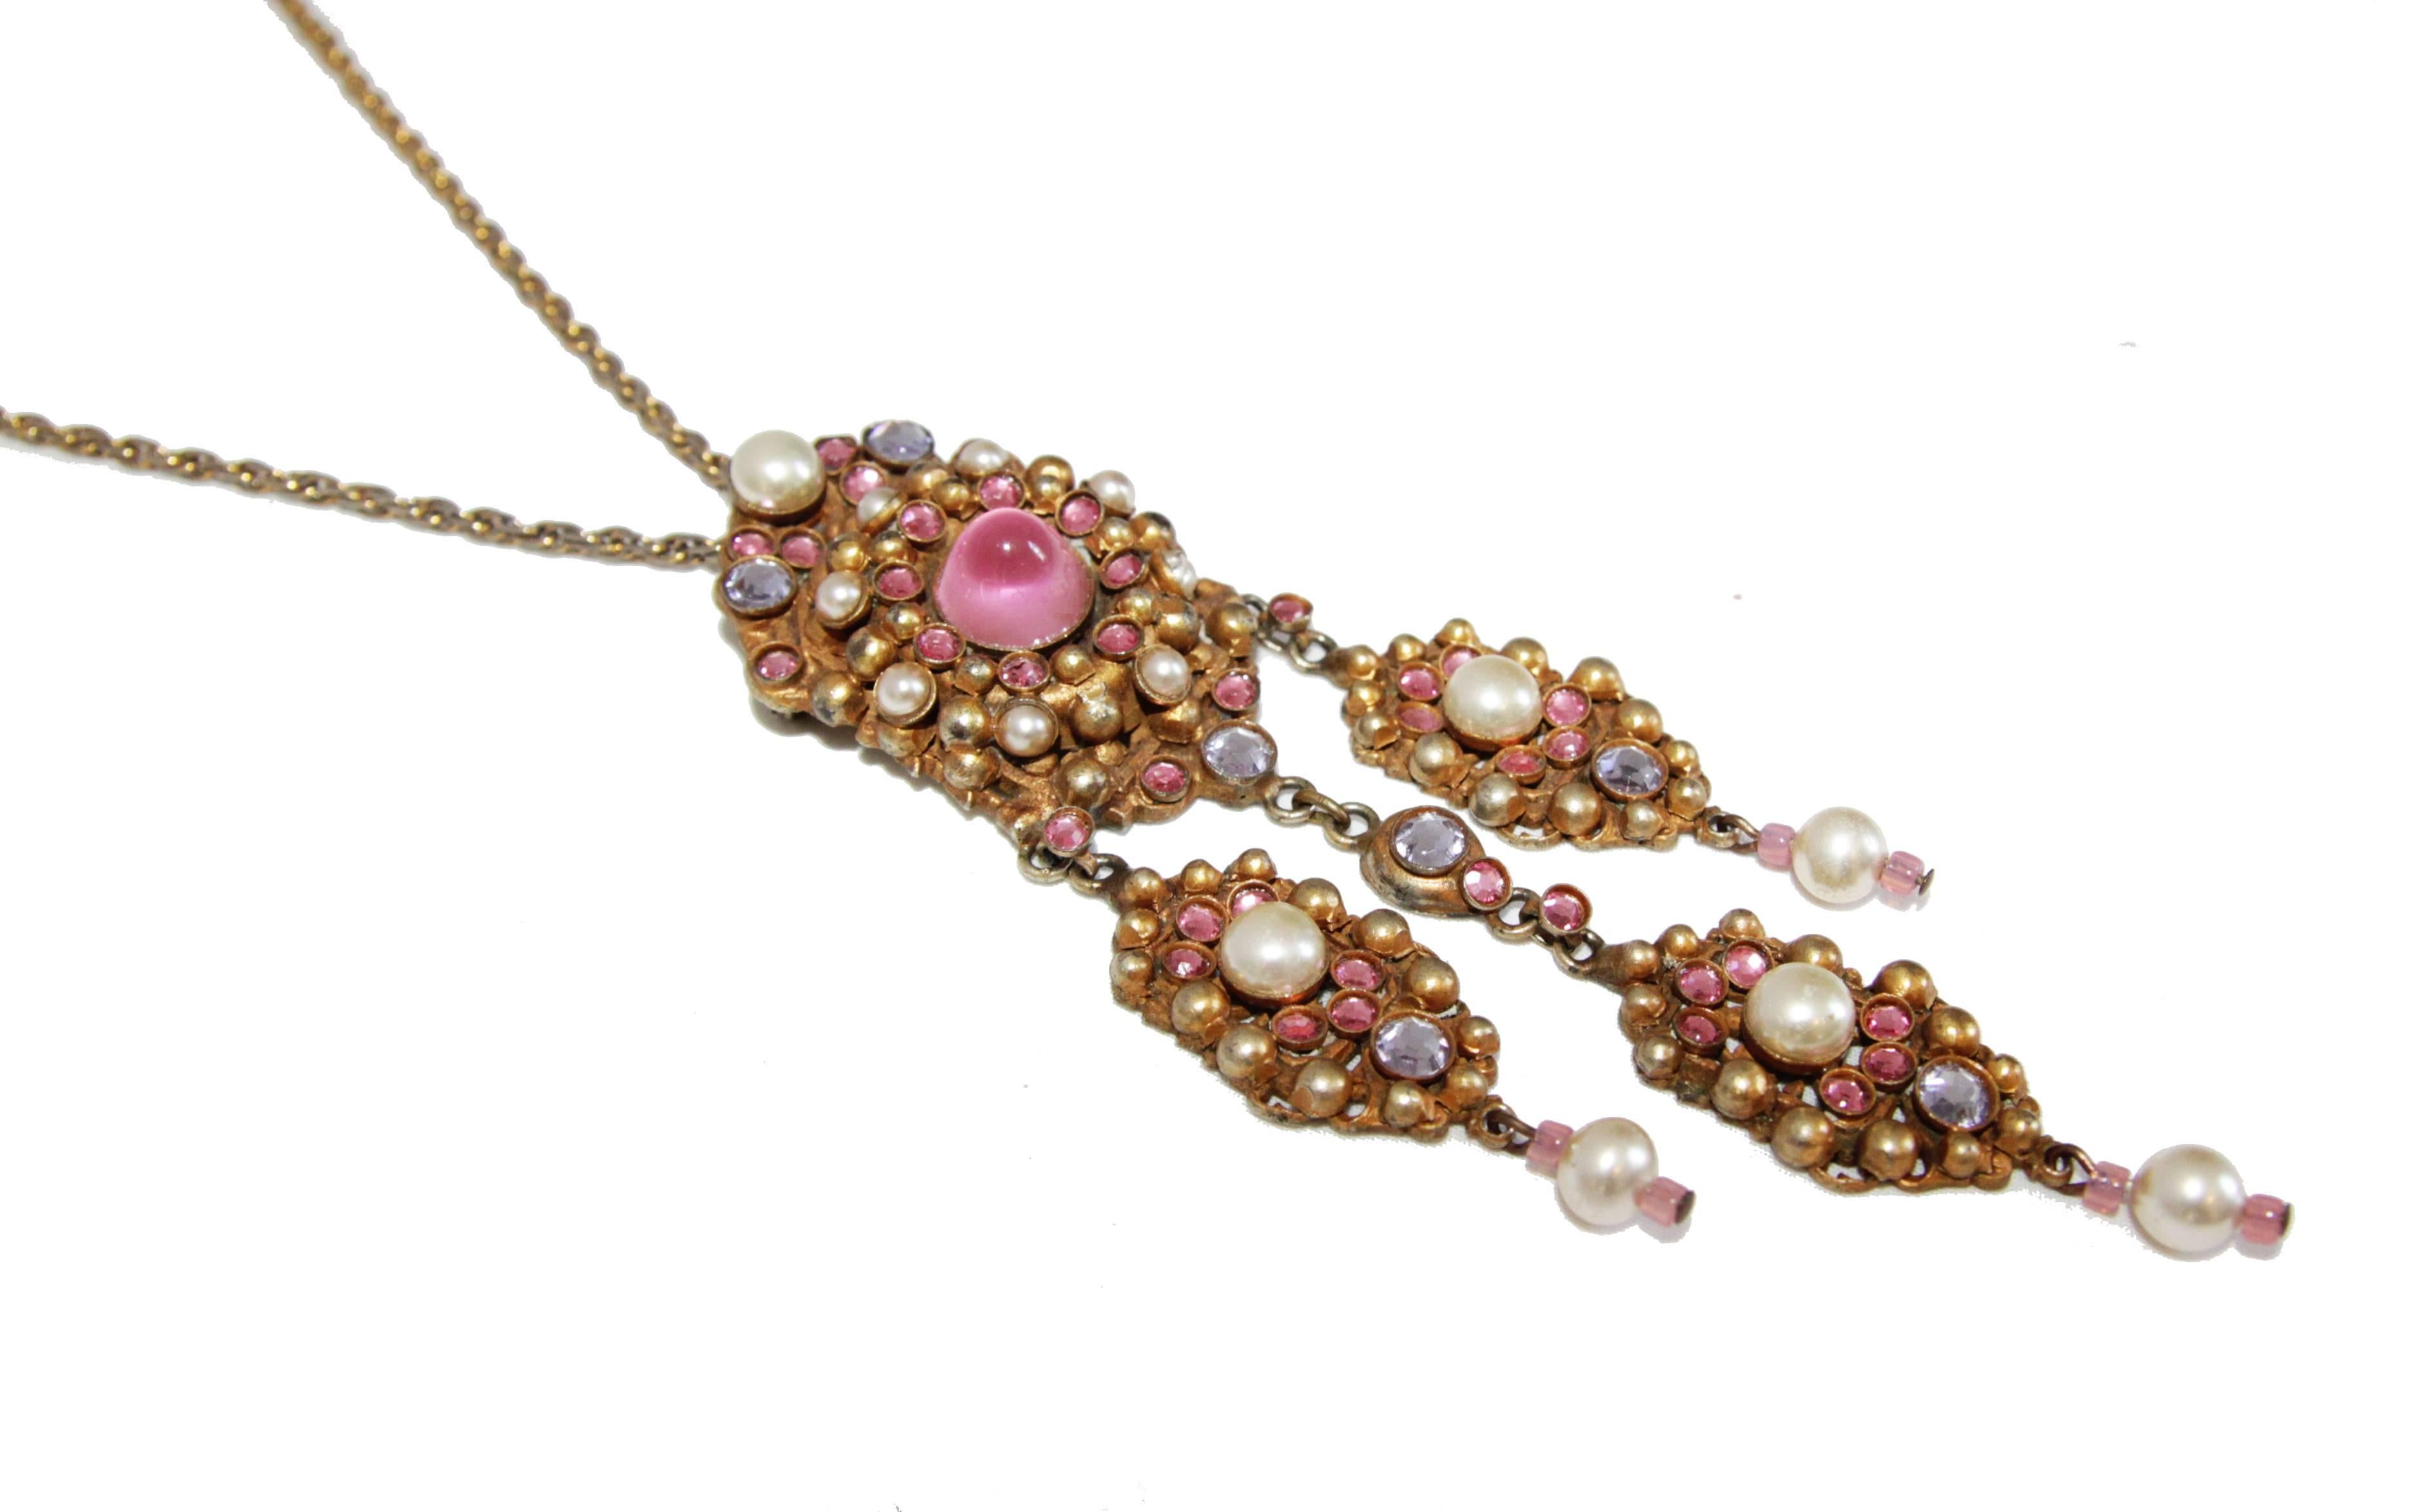 Fabulous French Couture Henry vintage necklace/brooch, circa : 1960.  Made of bronze, simulated pearls, crystal and glass. Marked : Henry

Henry is a jeweler from Lyon in the 50s years. He was one of the first to develop costume jewelery. Its